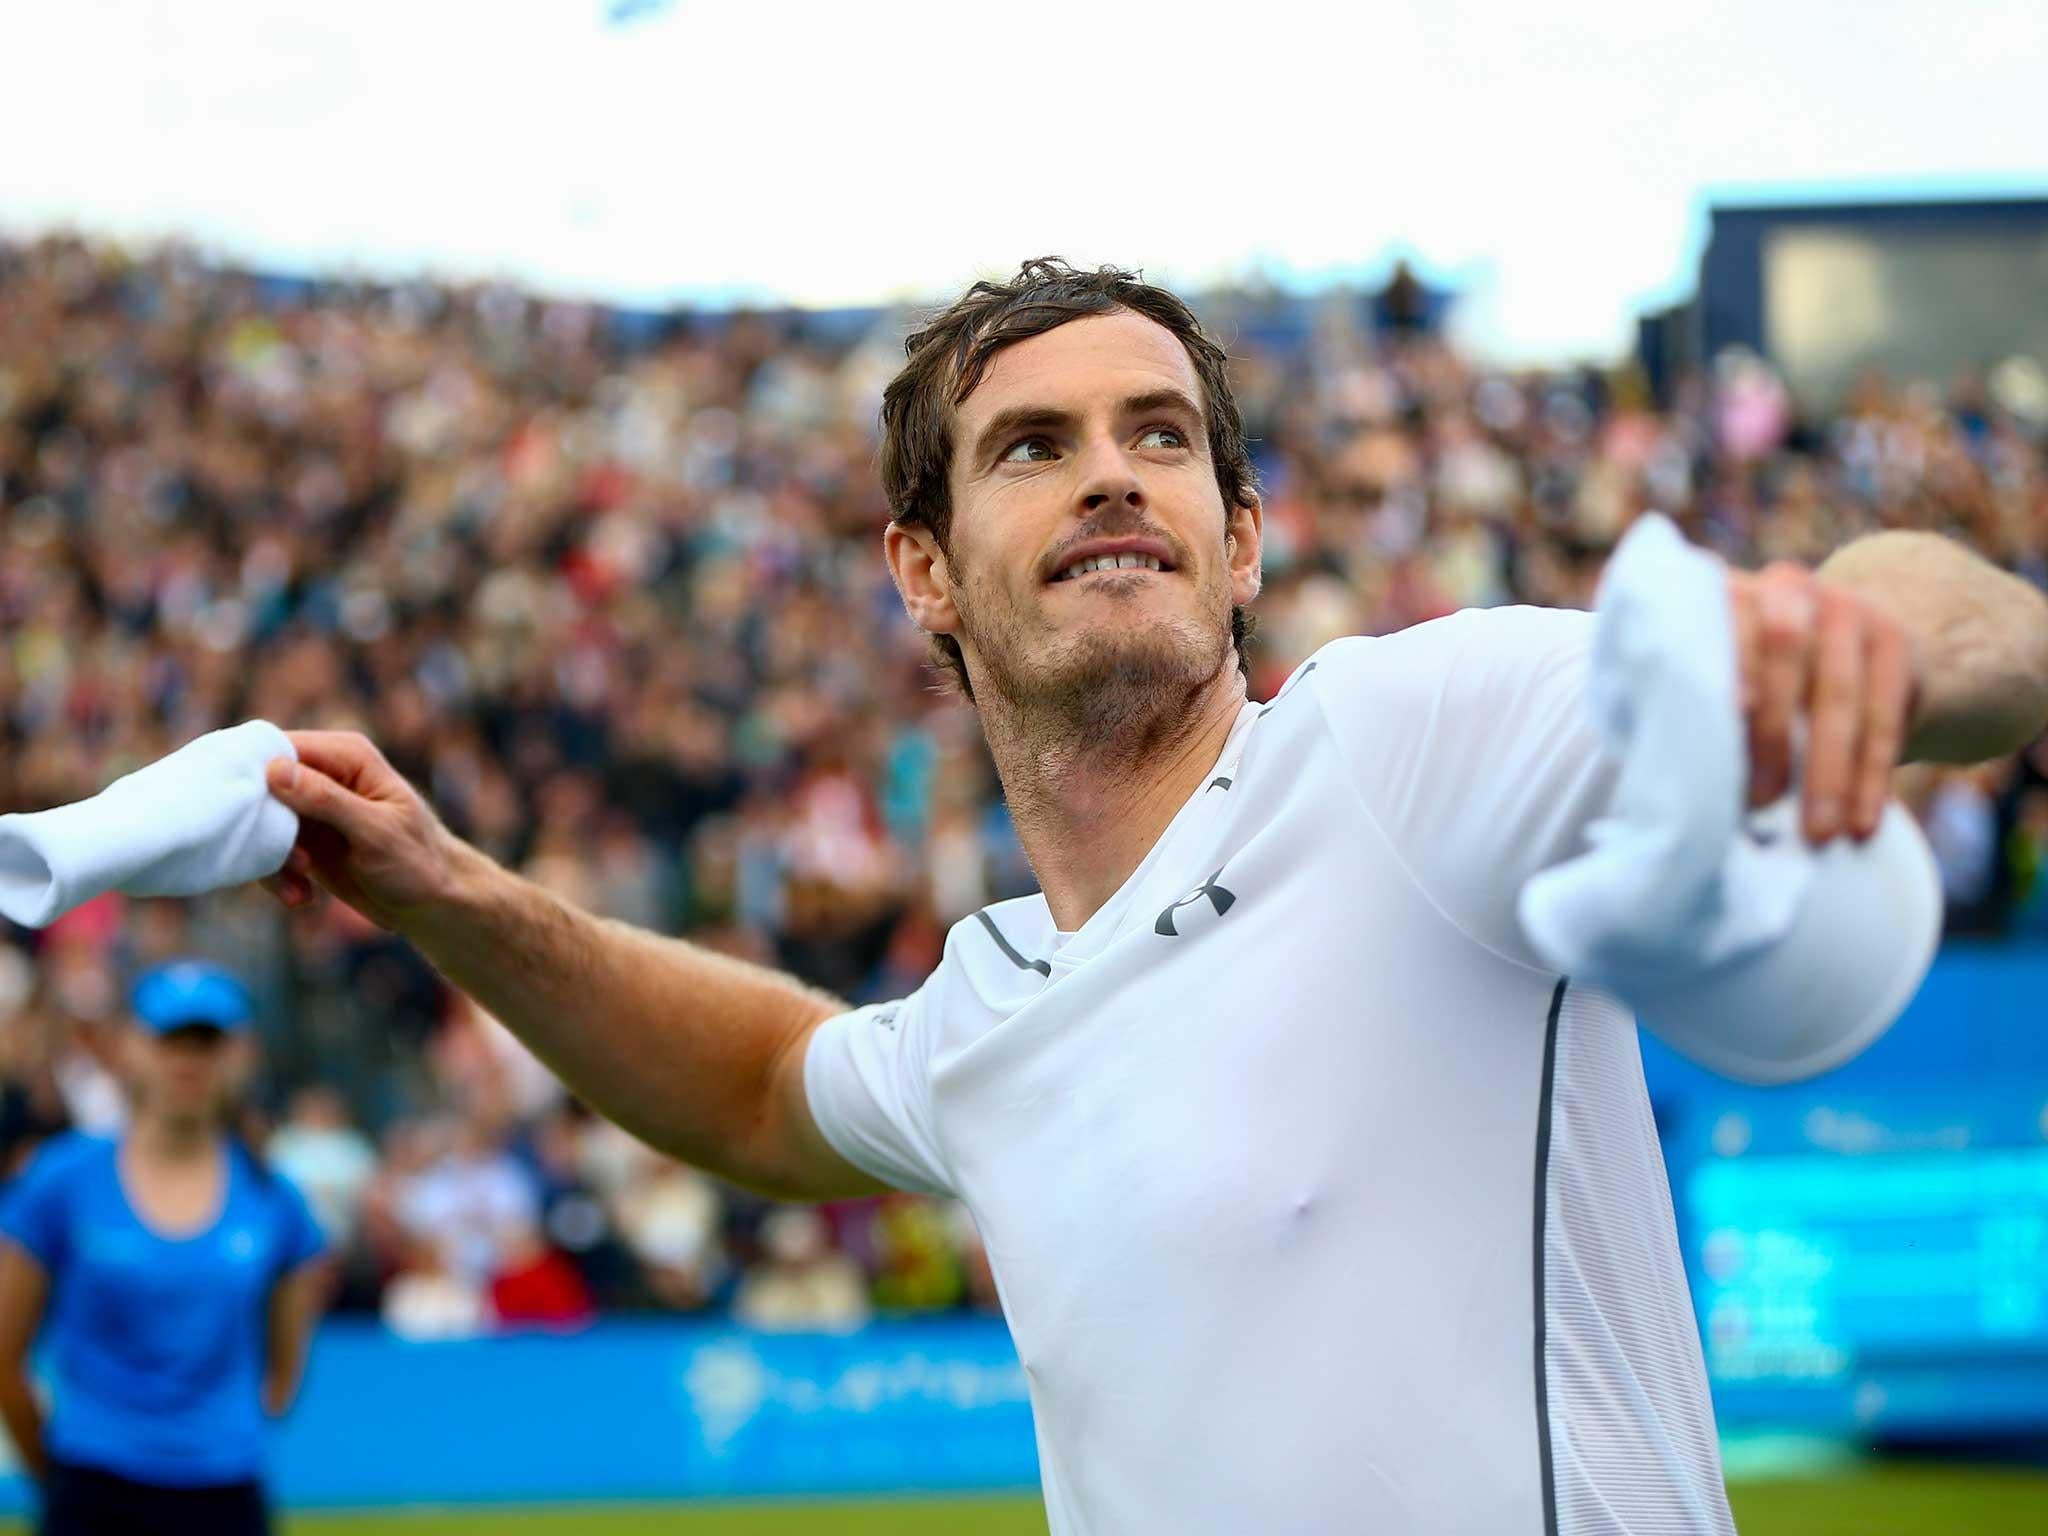 Andy Murray returns to Wimbledon among the favourites this summer